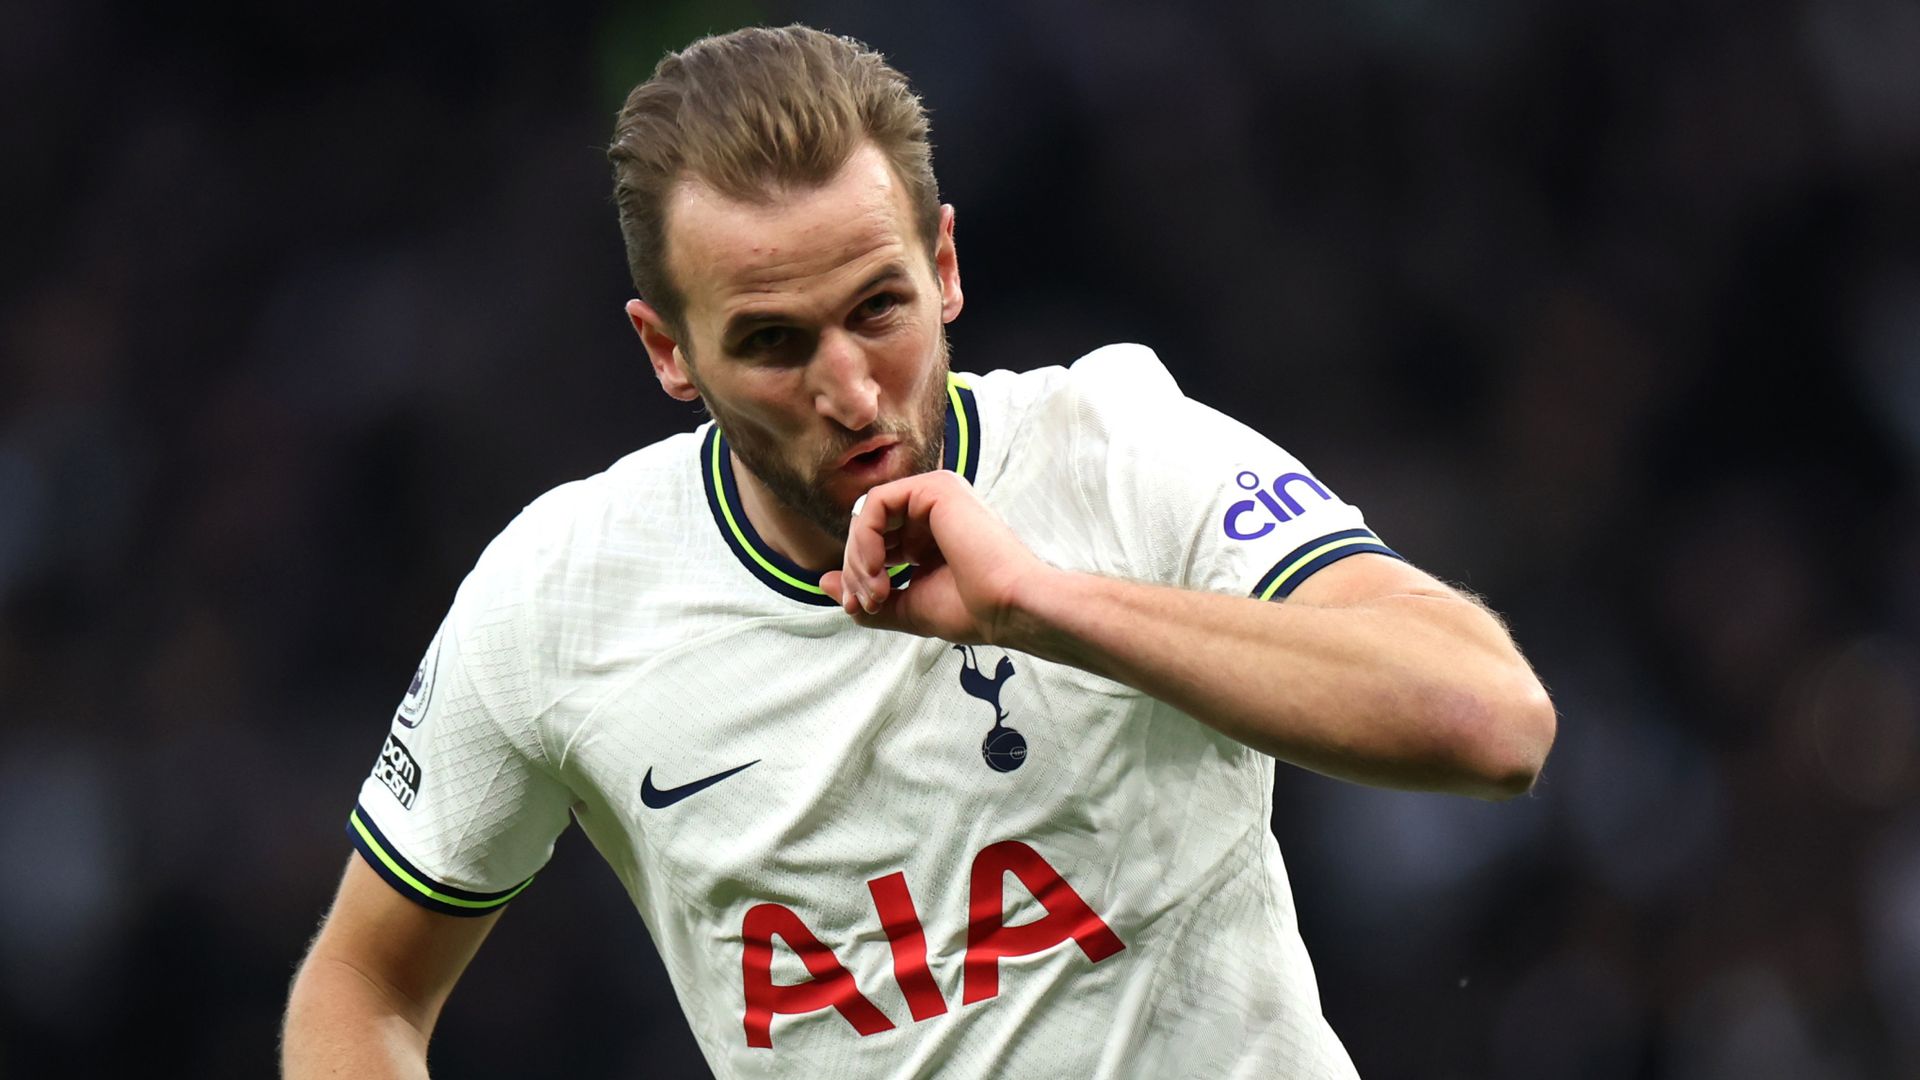 Kane breaks Greaves' scoring record as Spurs help Arsenal by beating City